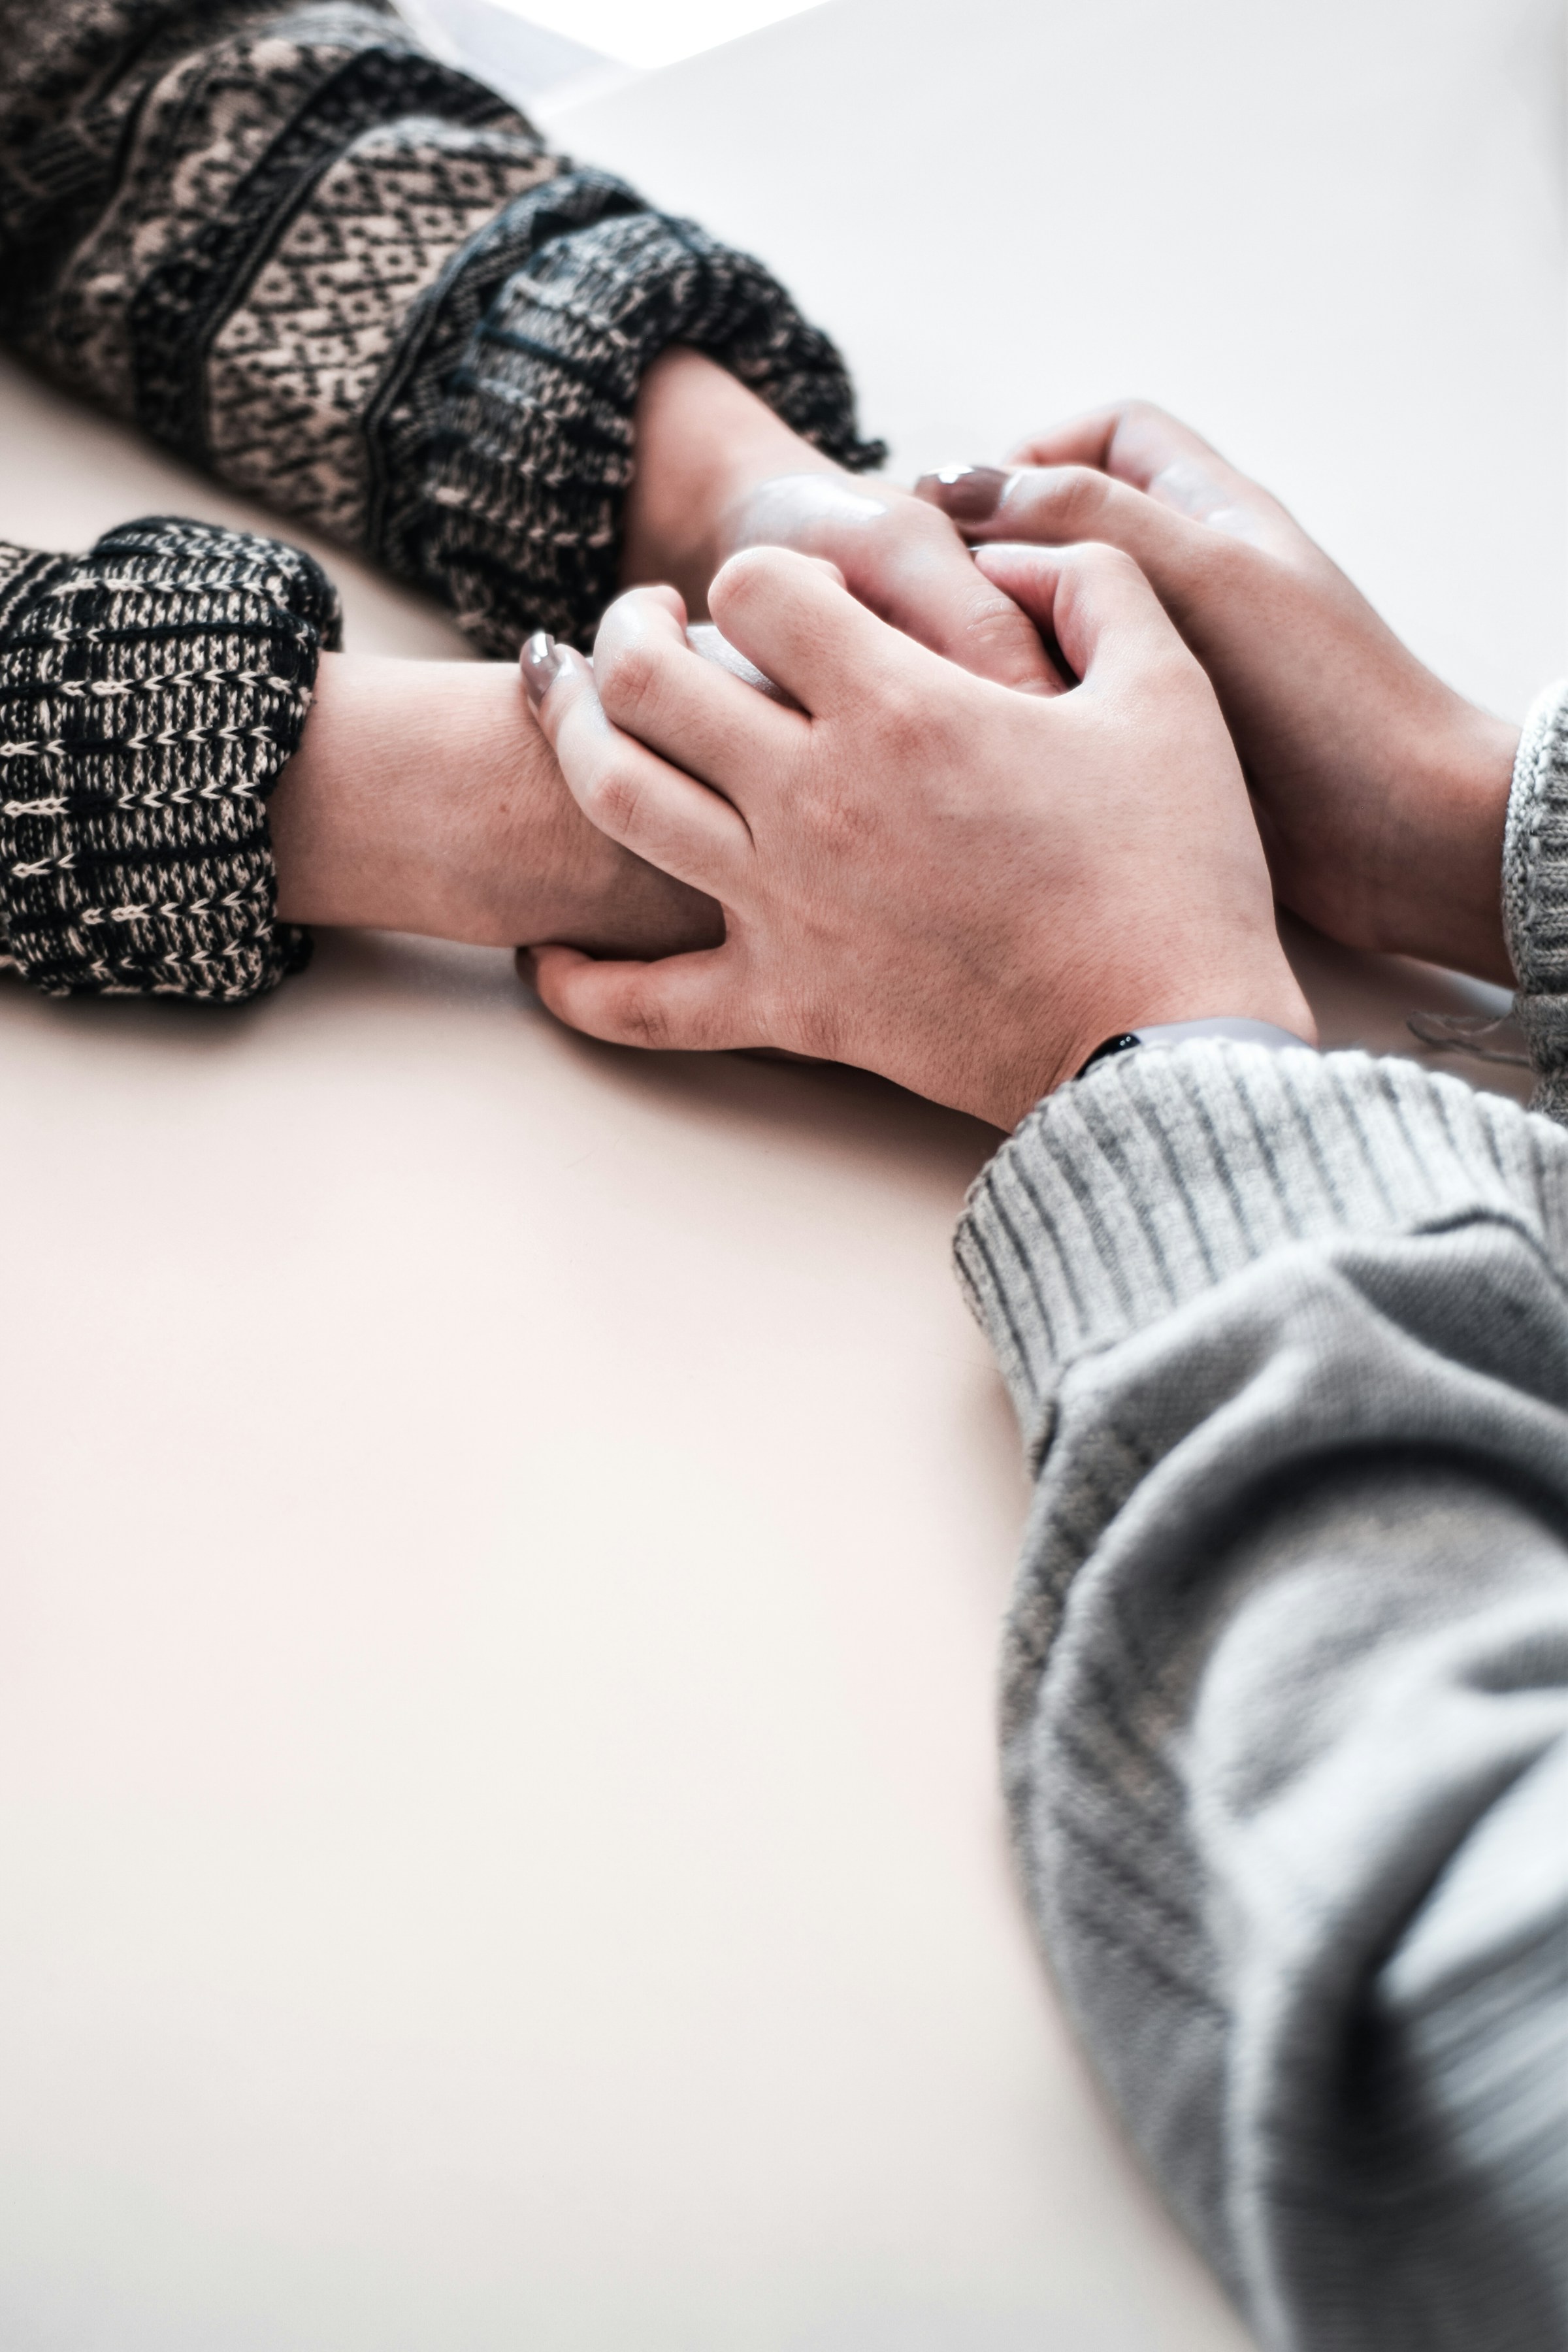 A pair of people holding hands | Source: Unsplash